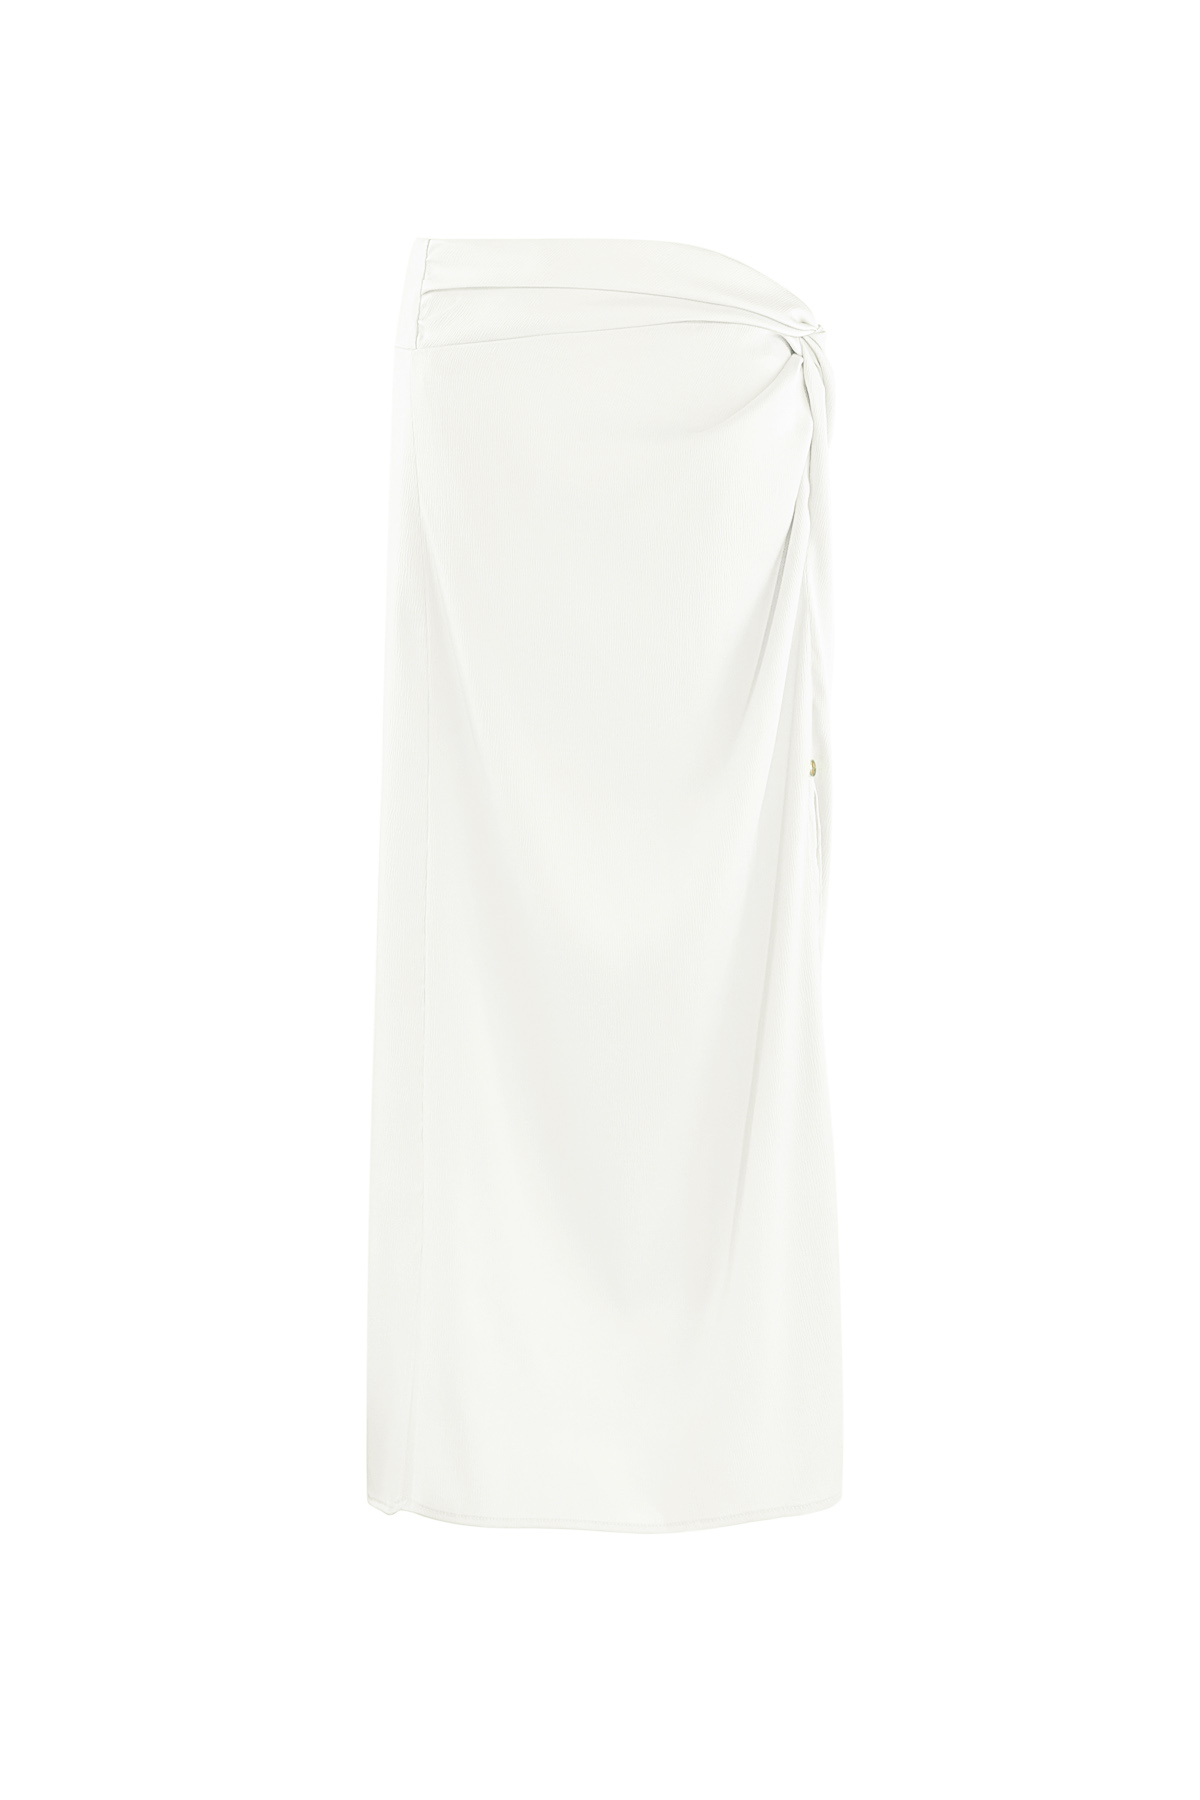 Long skirt knotted - white  h5 